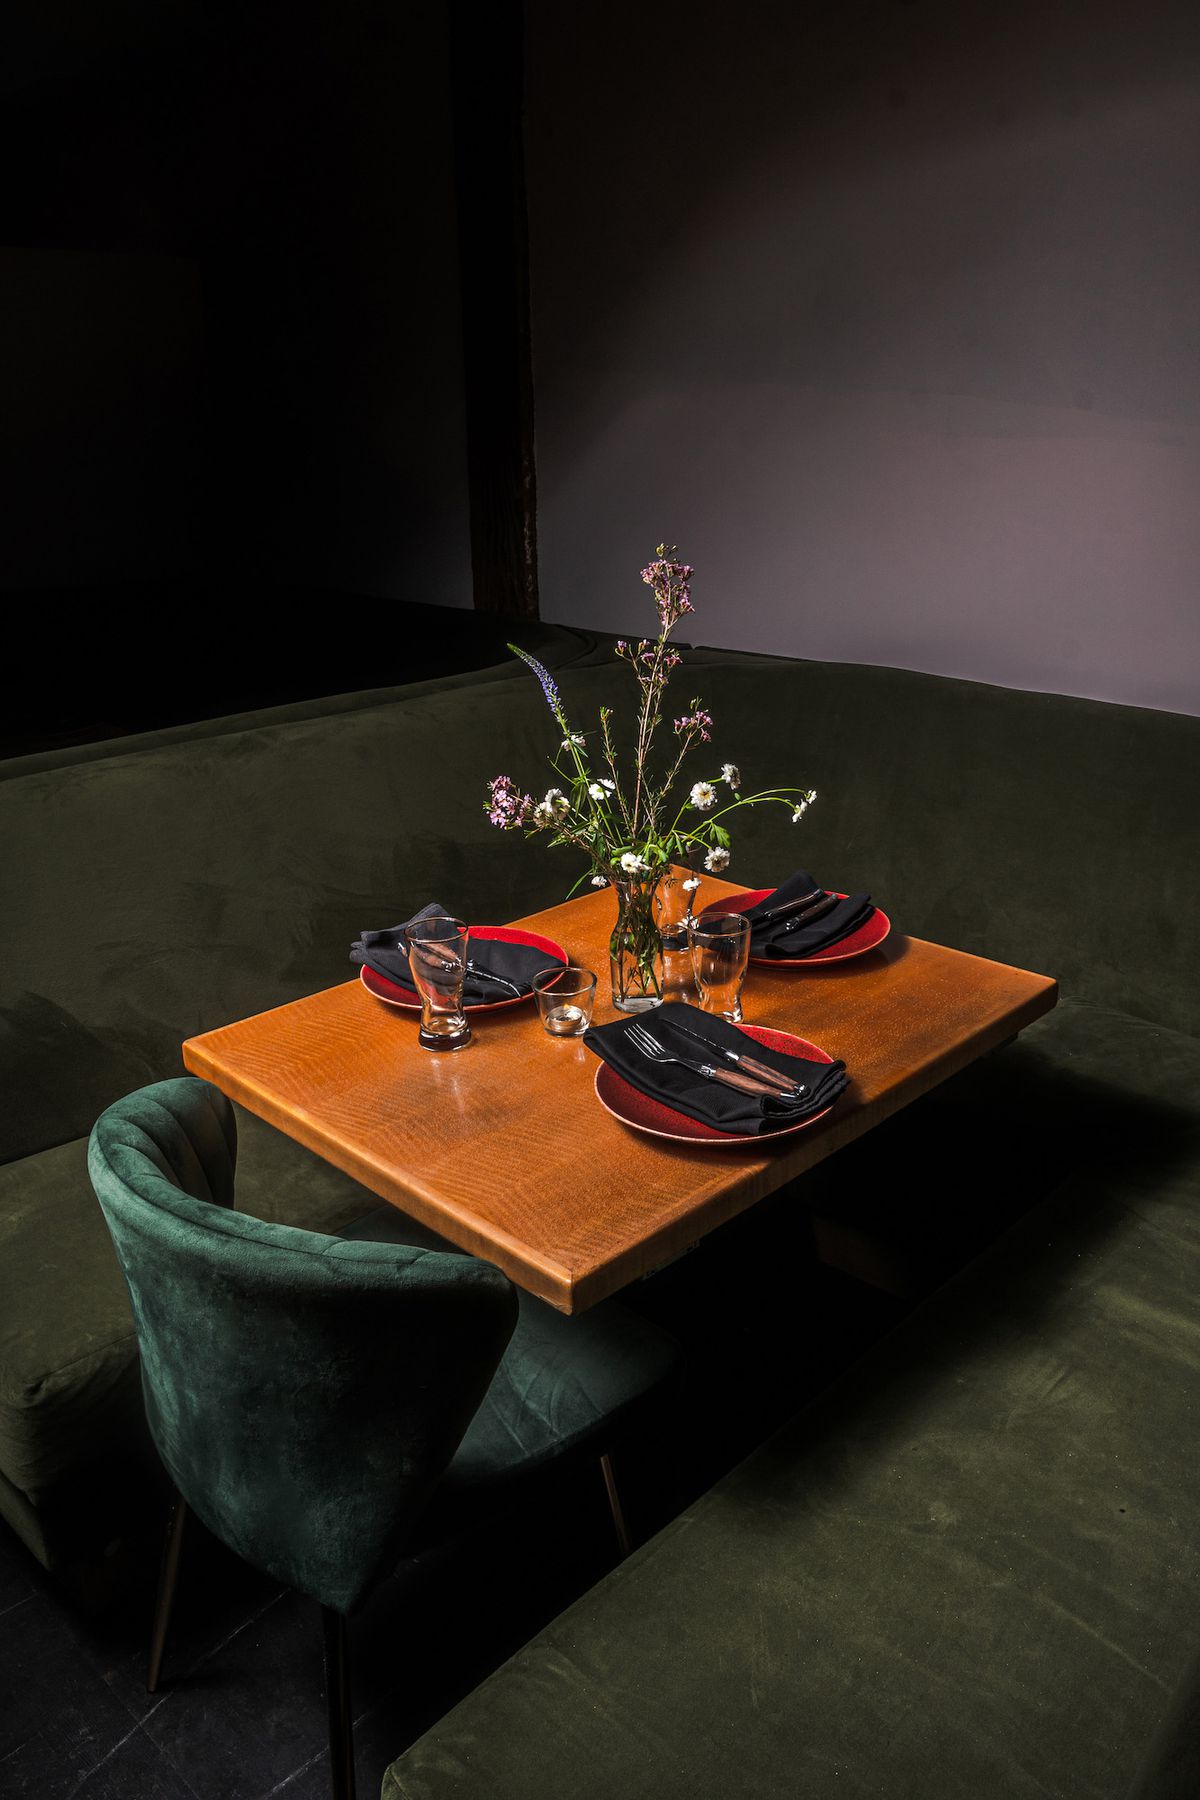 Three black and red settings inside a dark dining room on a wooden table.